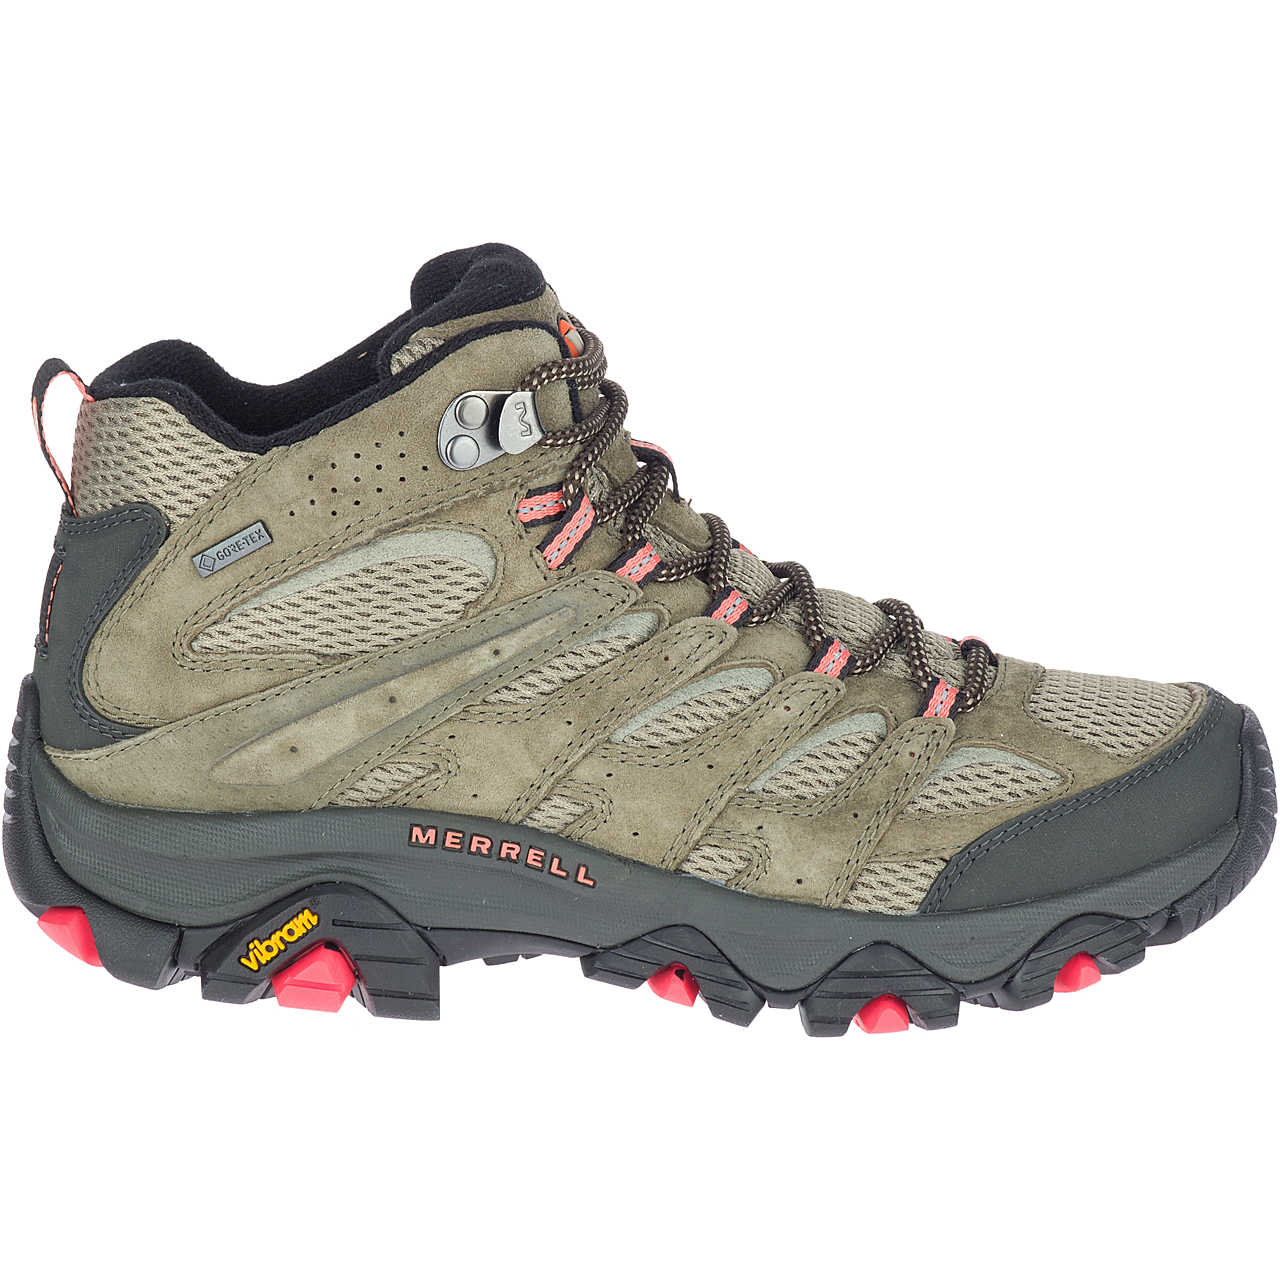 Women's Moab collection | Merrell